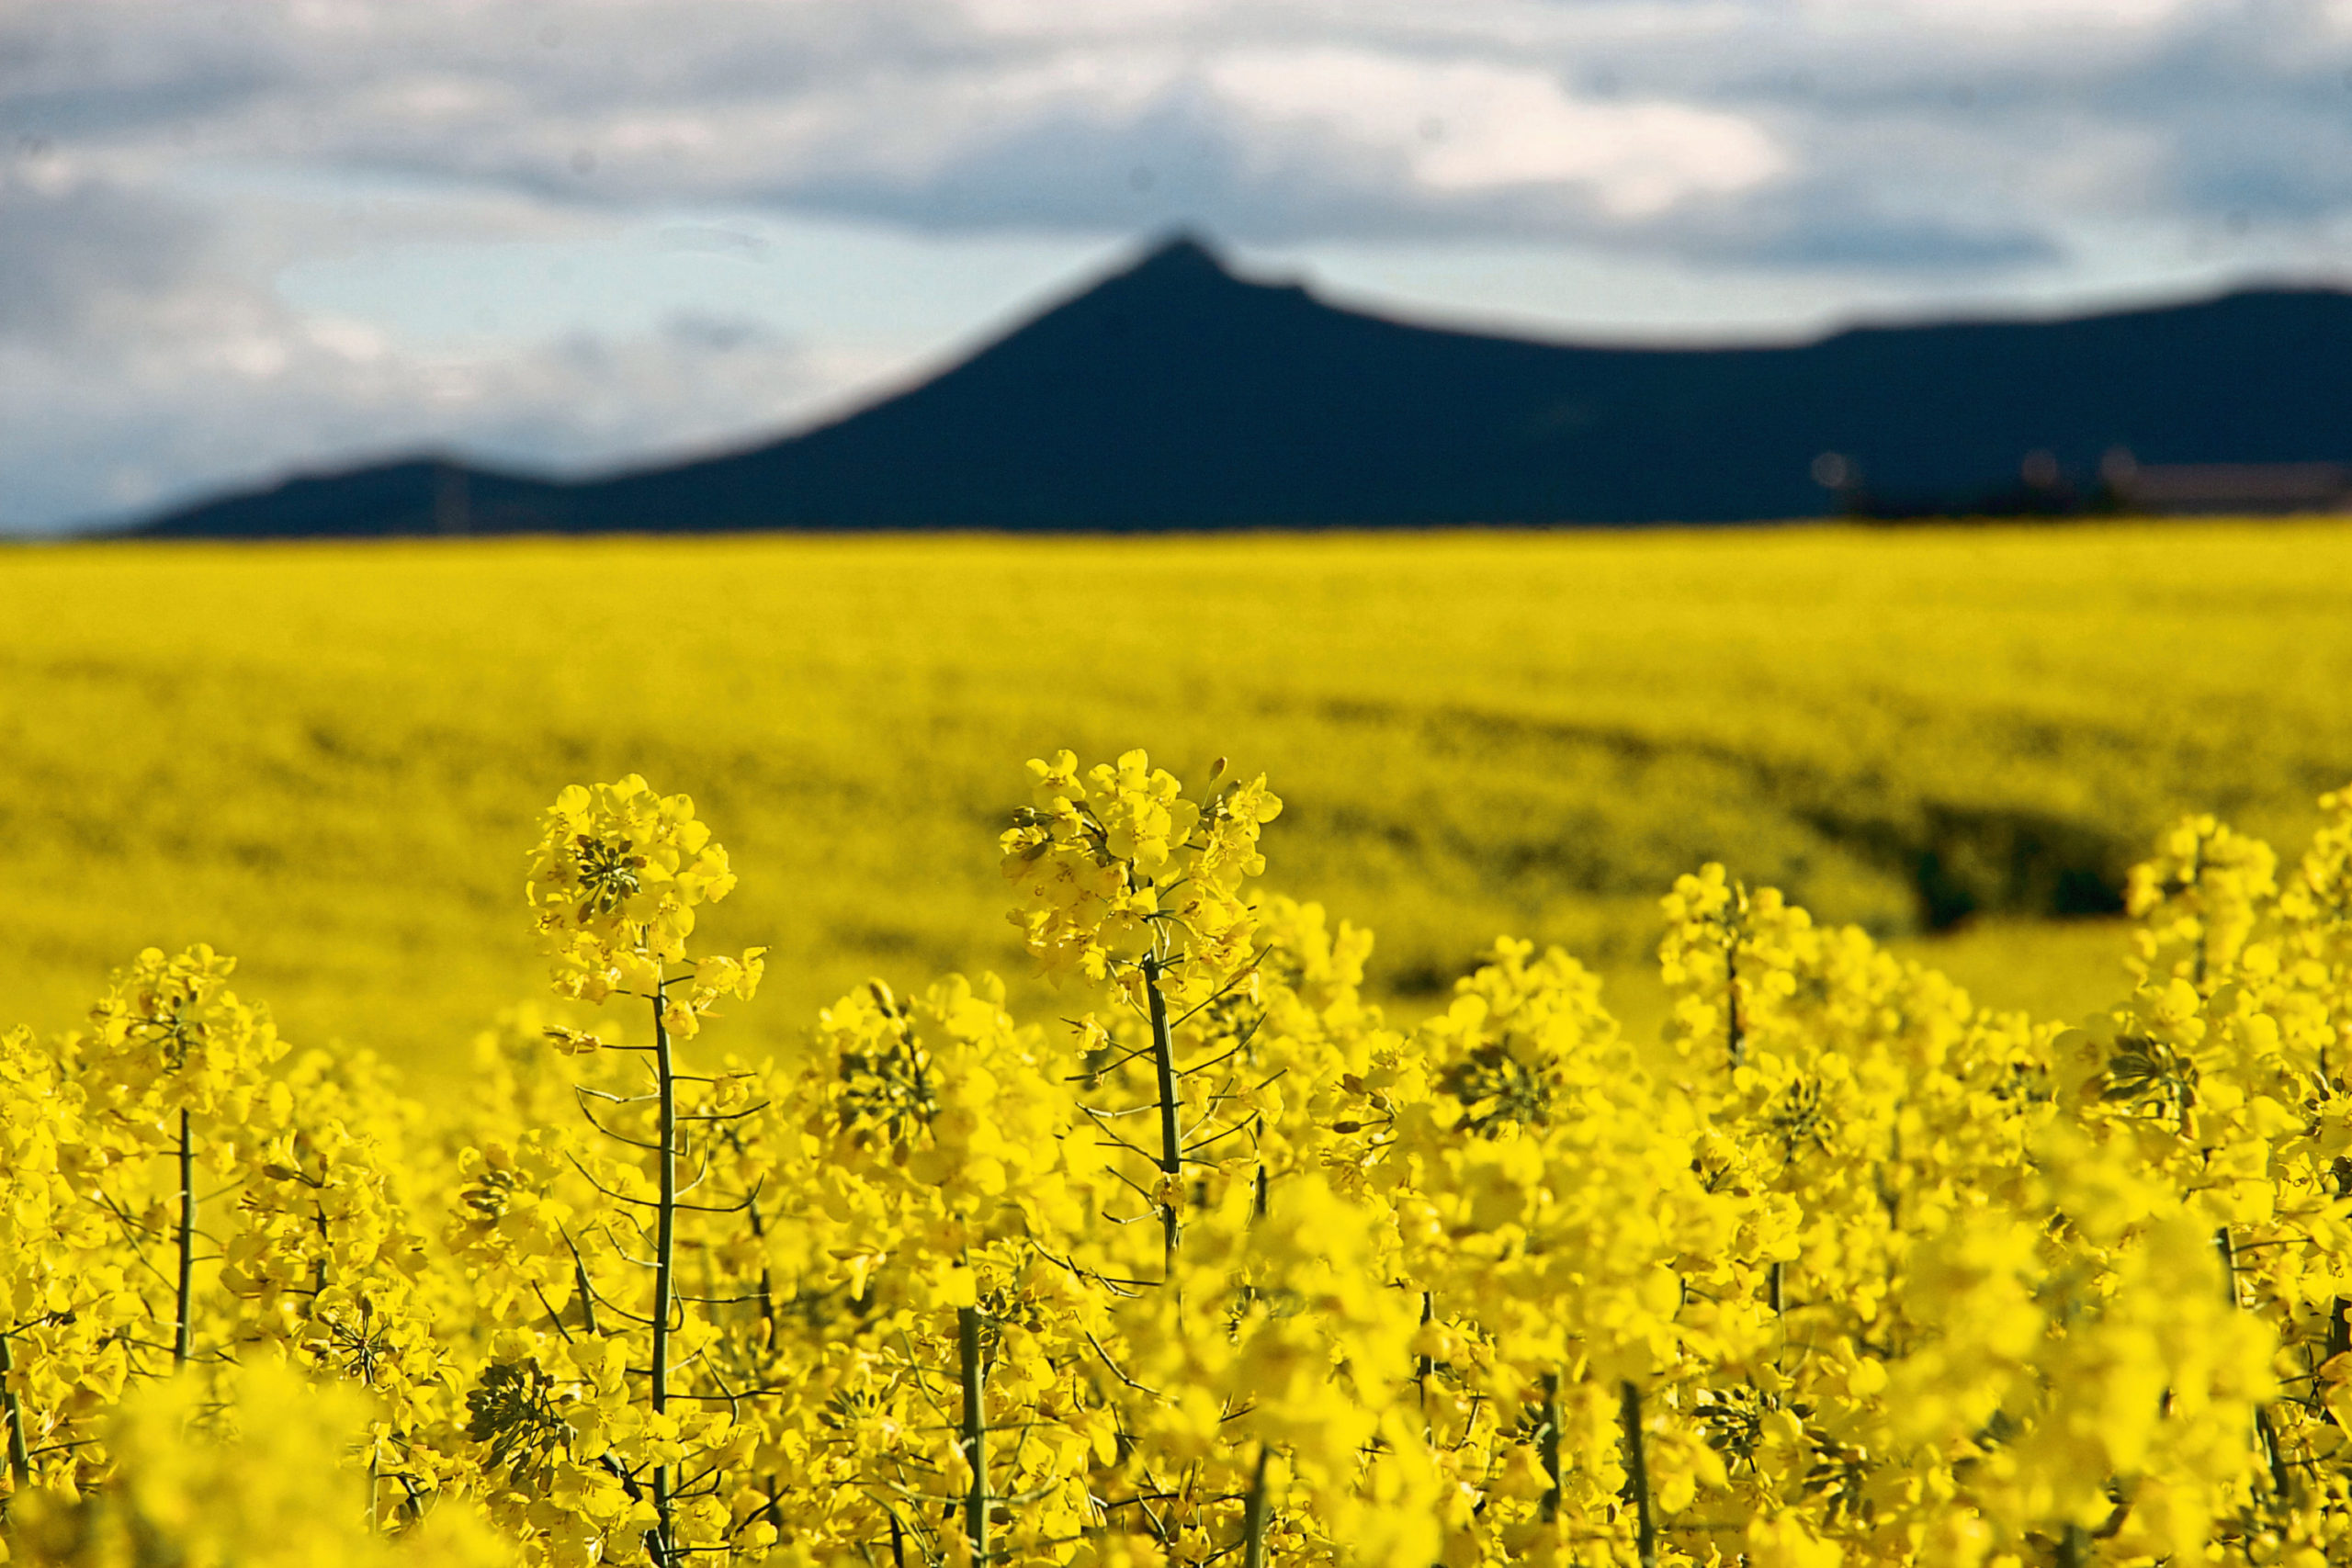 Crop growers in Scotland will still be able to export as usual this summer to EU countries.